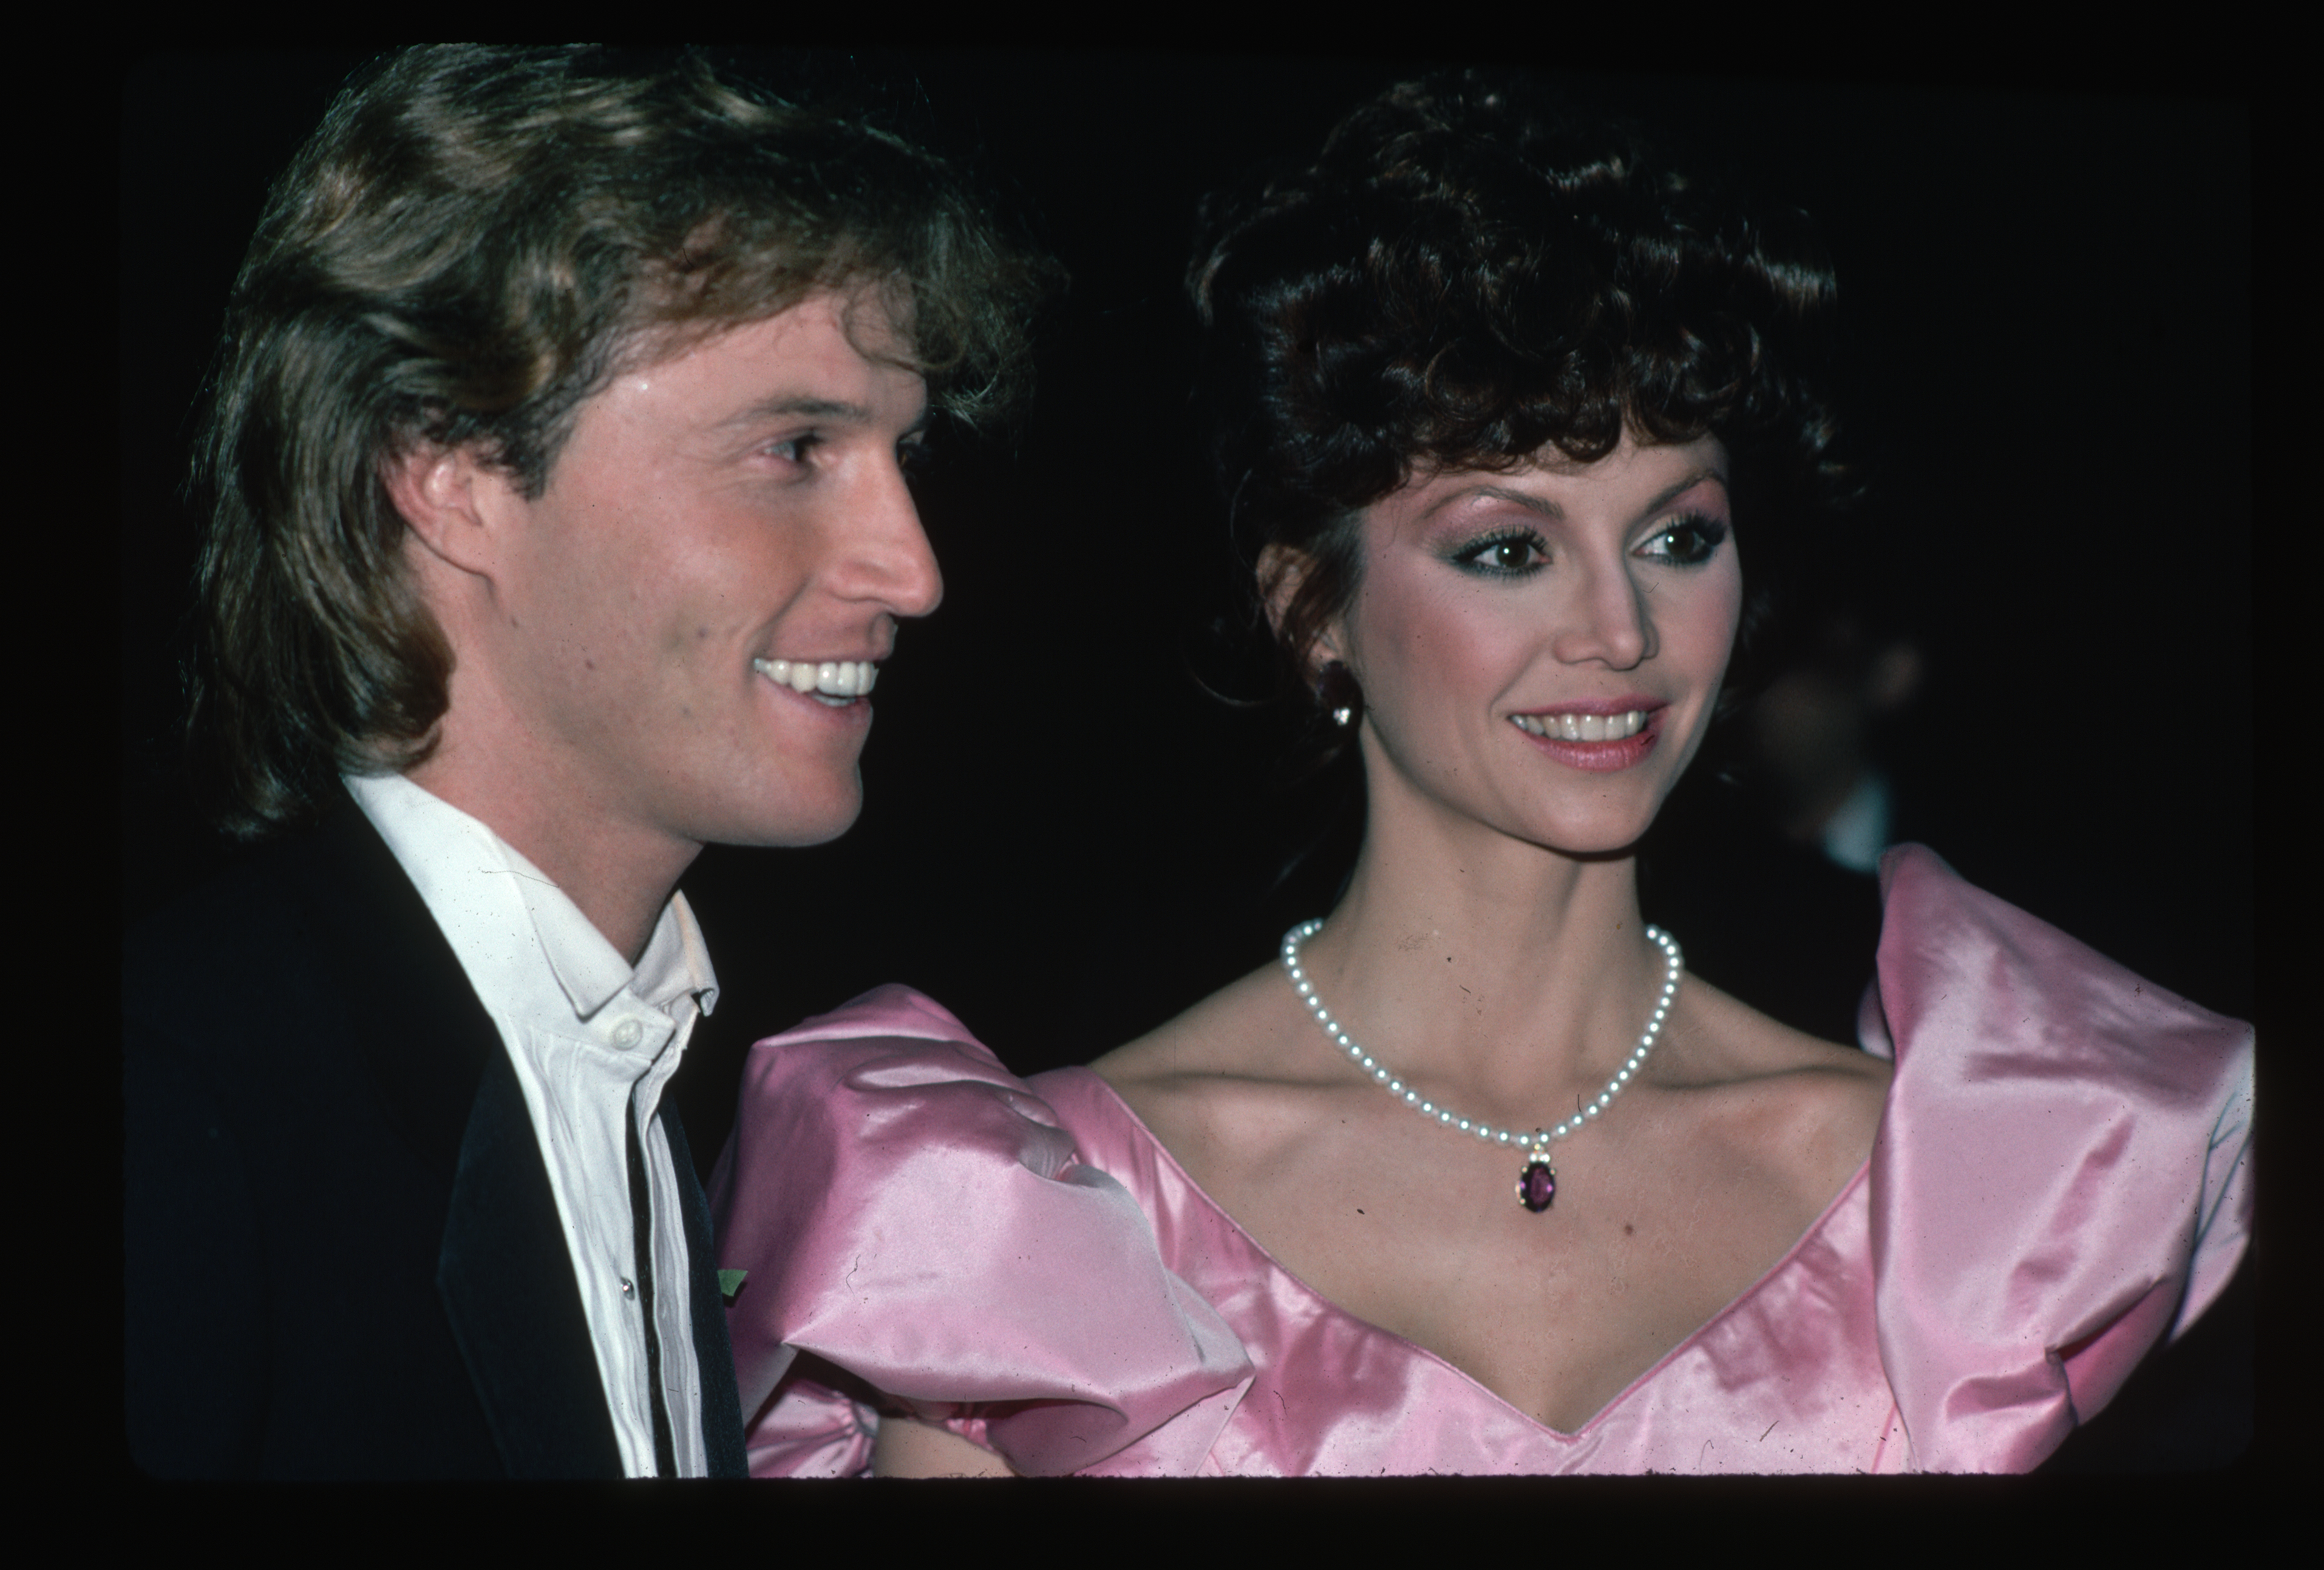 Actress Victoria Principal and singer Andy Gibb posing together in 1982 | Source: Getty Images